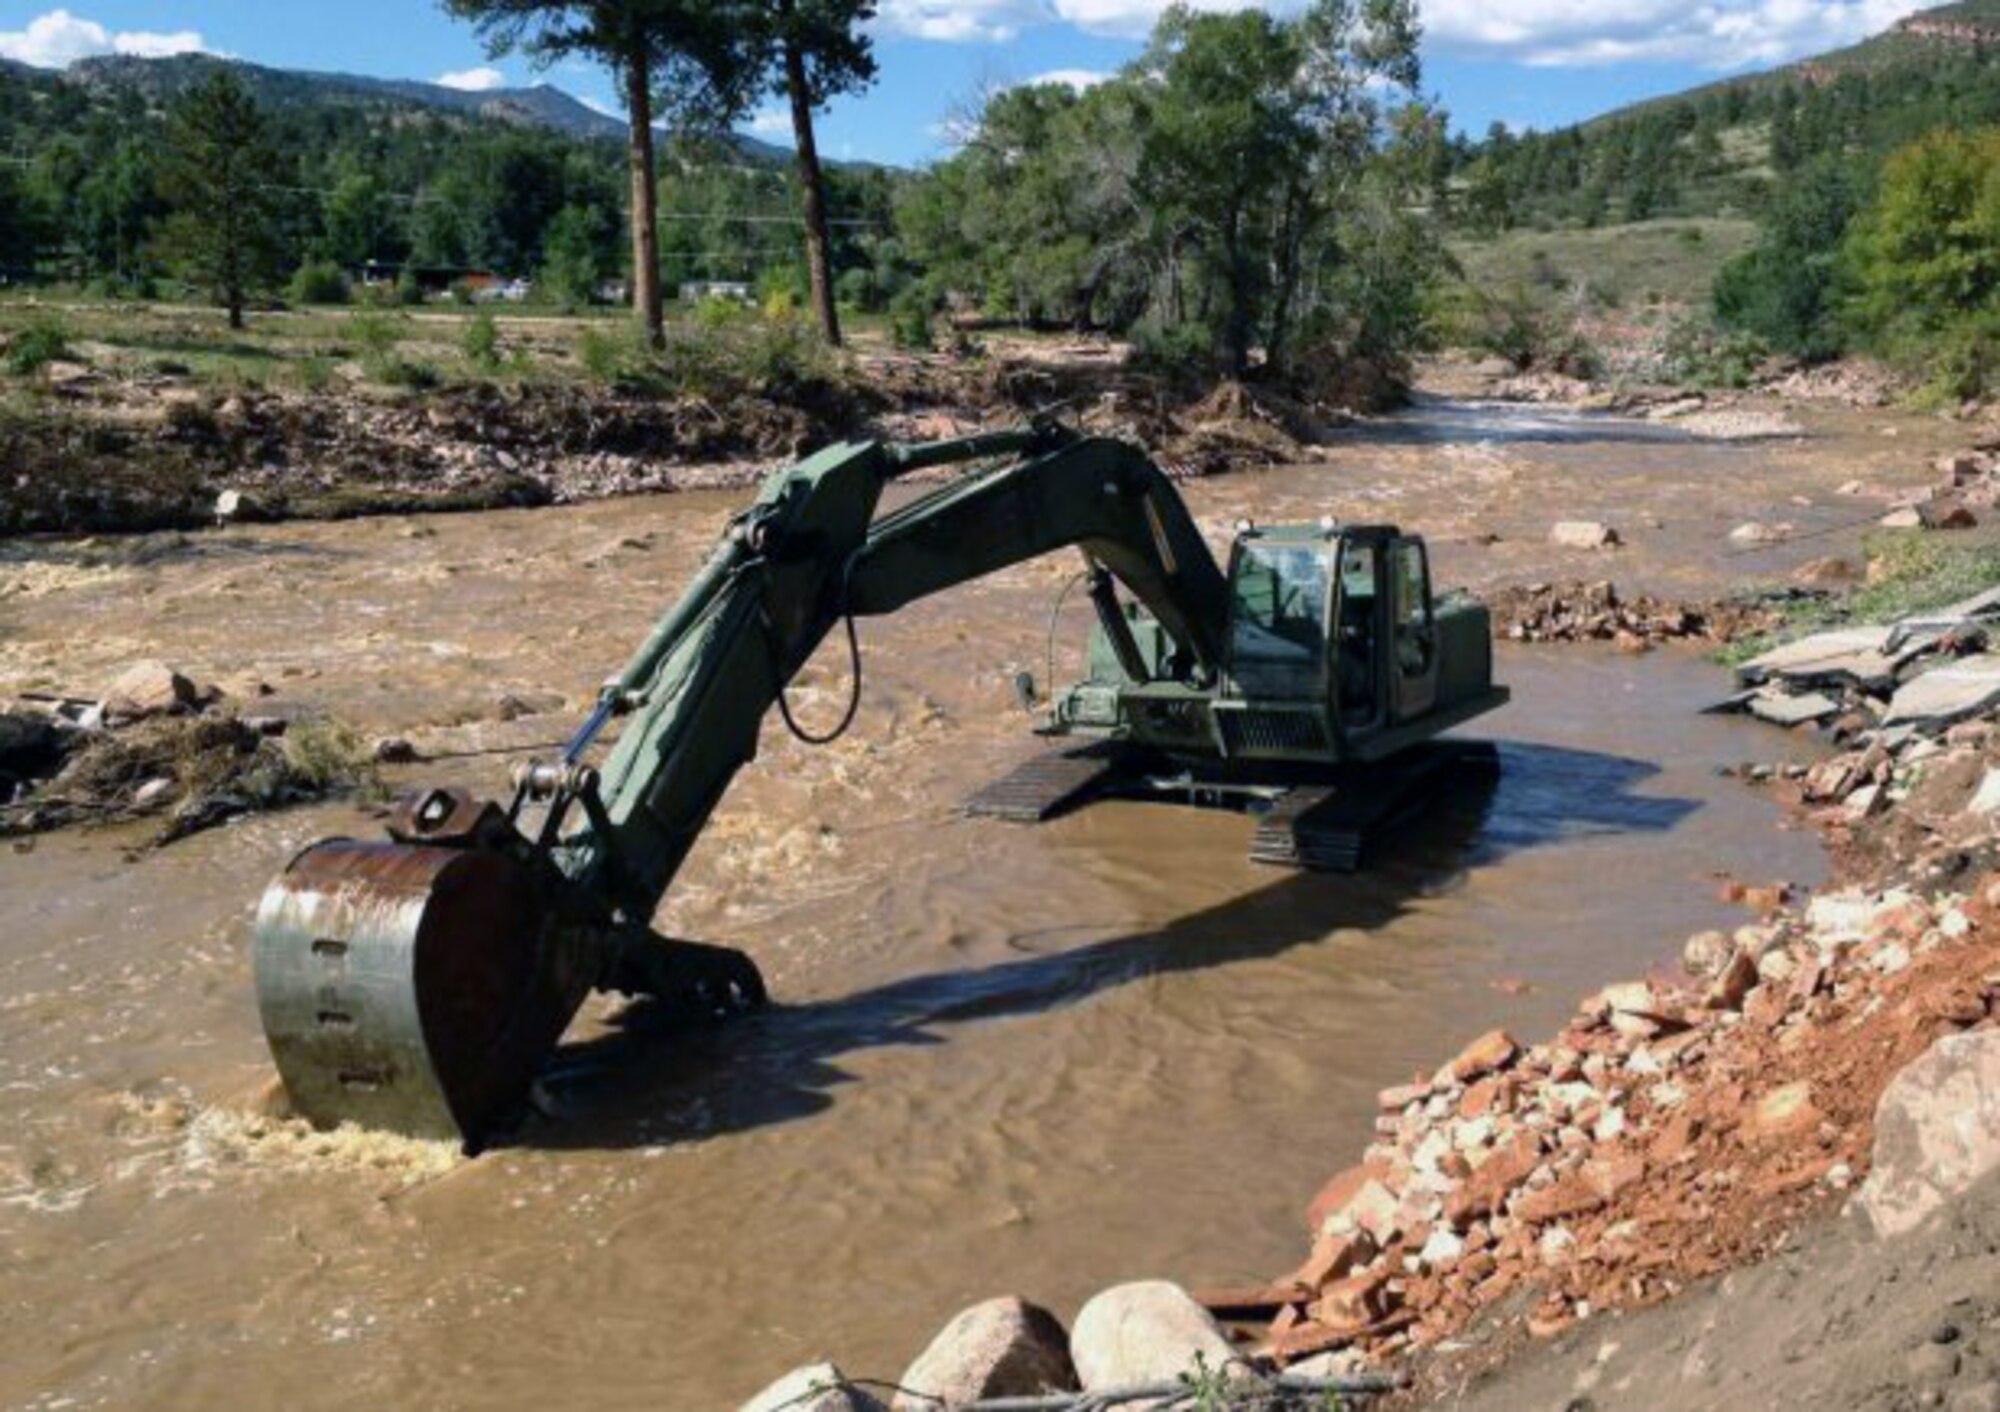 The Texas Army National Guard's 36th Infantry Division's Domestic All-Hazards Response Team-West continues to coordinate assistance requests and support for the Colorado flood relief effort. Pictured here, a military hydraulic excavator works to clear the remainder of a Colorado road after a flood washed it away. (Photo by DART-W Public Affairs Office, 36th Infantry Division)